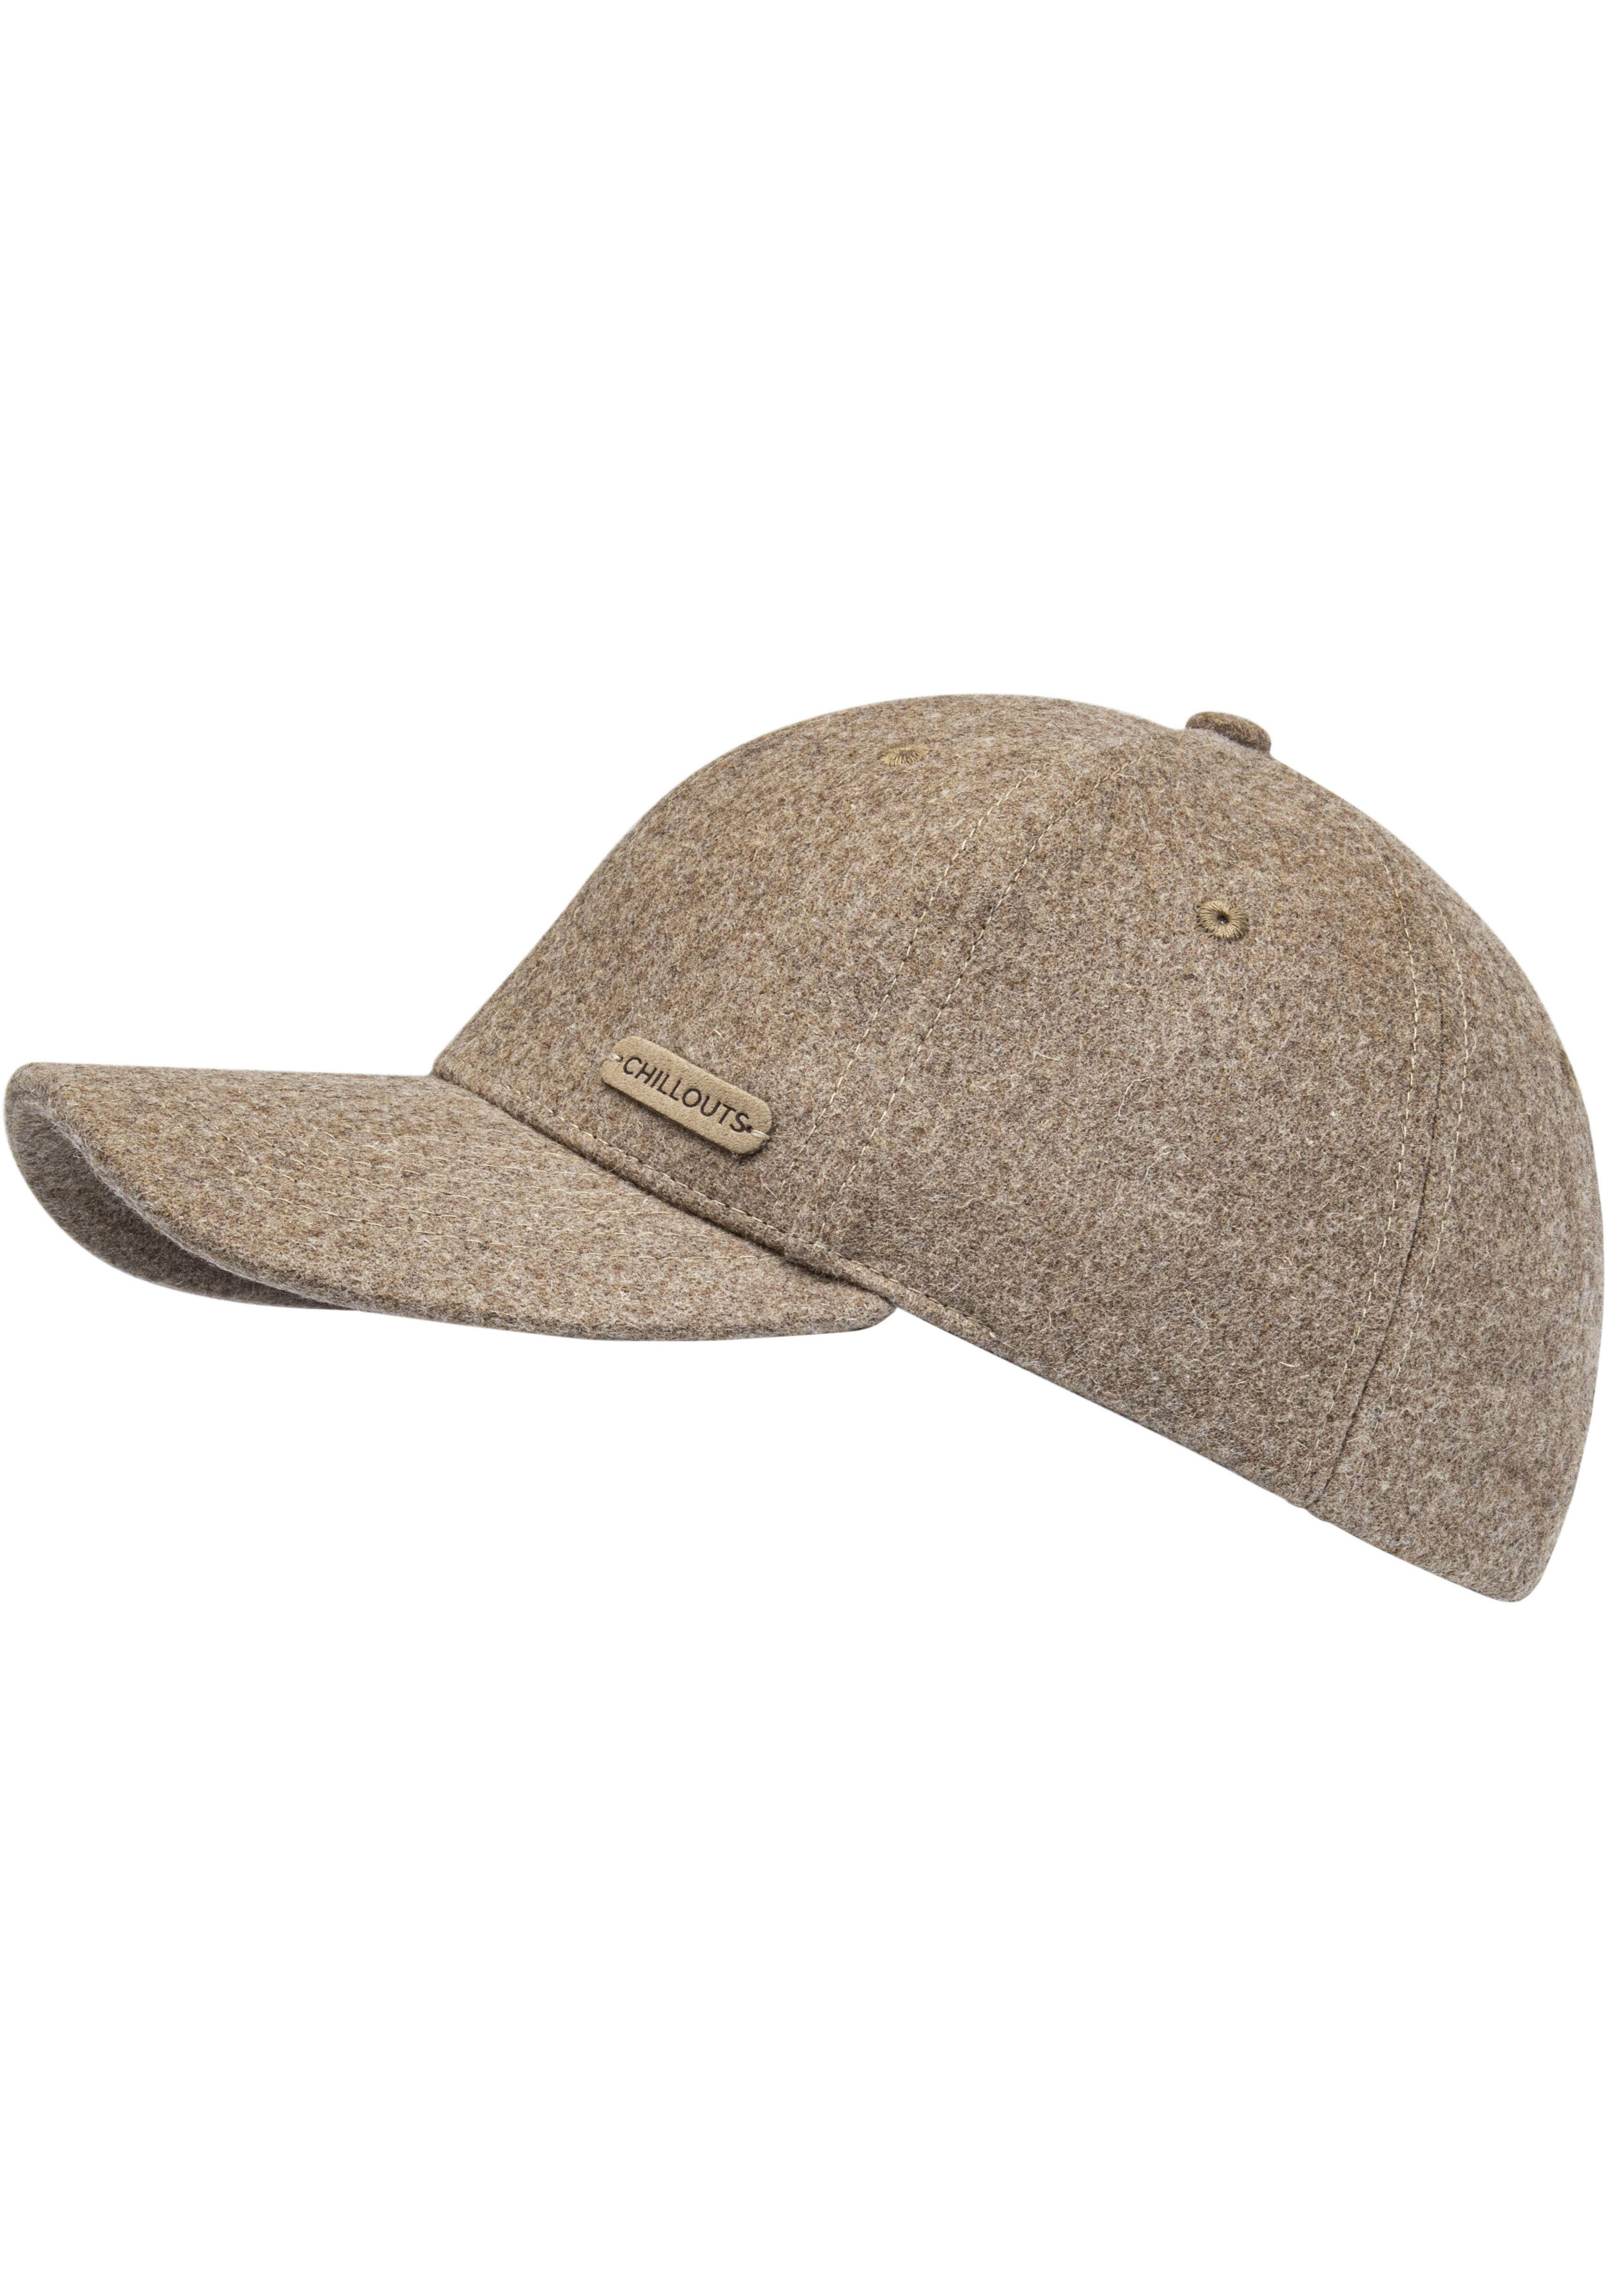 Marktstand chillouts Baseball camel Cap Wasserabweisendes Material Mateo Hat